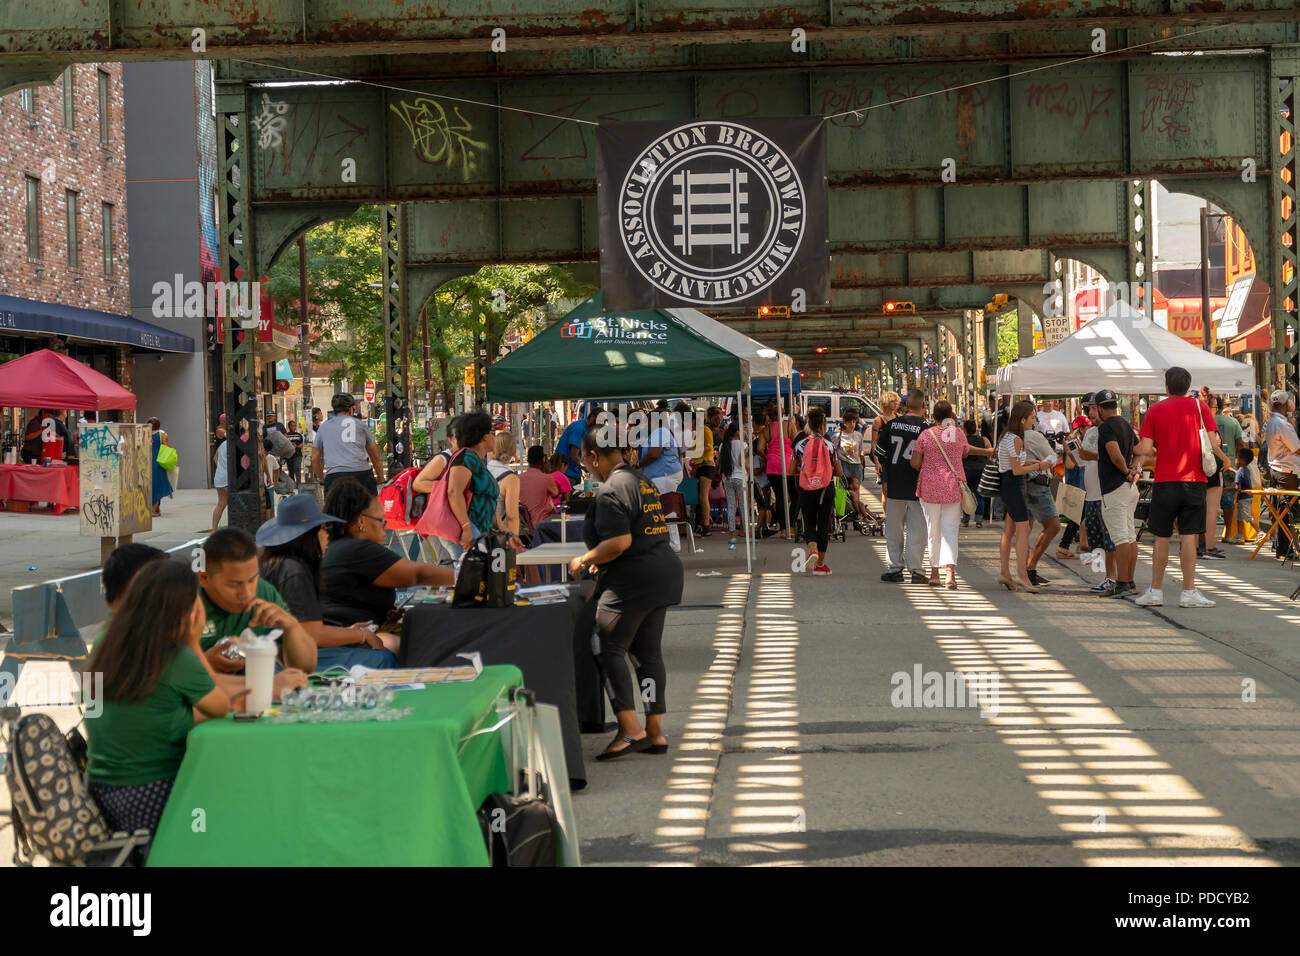 Tabling under the elevated train on Broadway in the Bushwick neighborhood of New York during the 'Block Party on Broadway' street fair on Sunday, August 5, 2018. The fair, sponsored by the Broadway Merchants Association, is in response to the K2 epidemic which has effected the Broadway corridor and is endeavoring to bring people back.  (© Richard B. Levine) Stock Photo